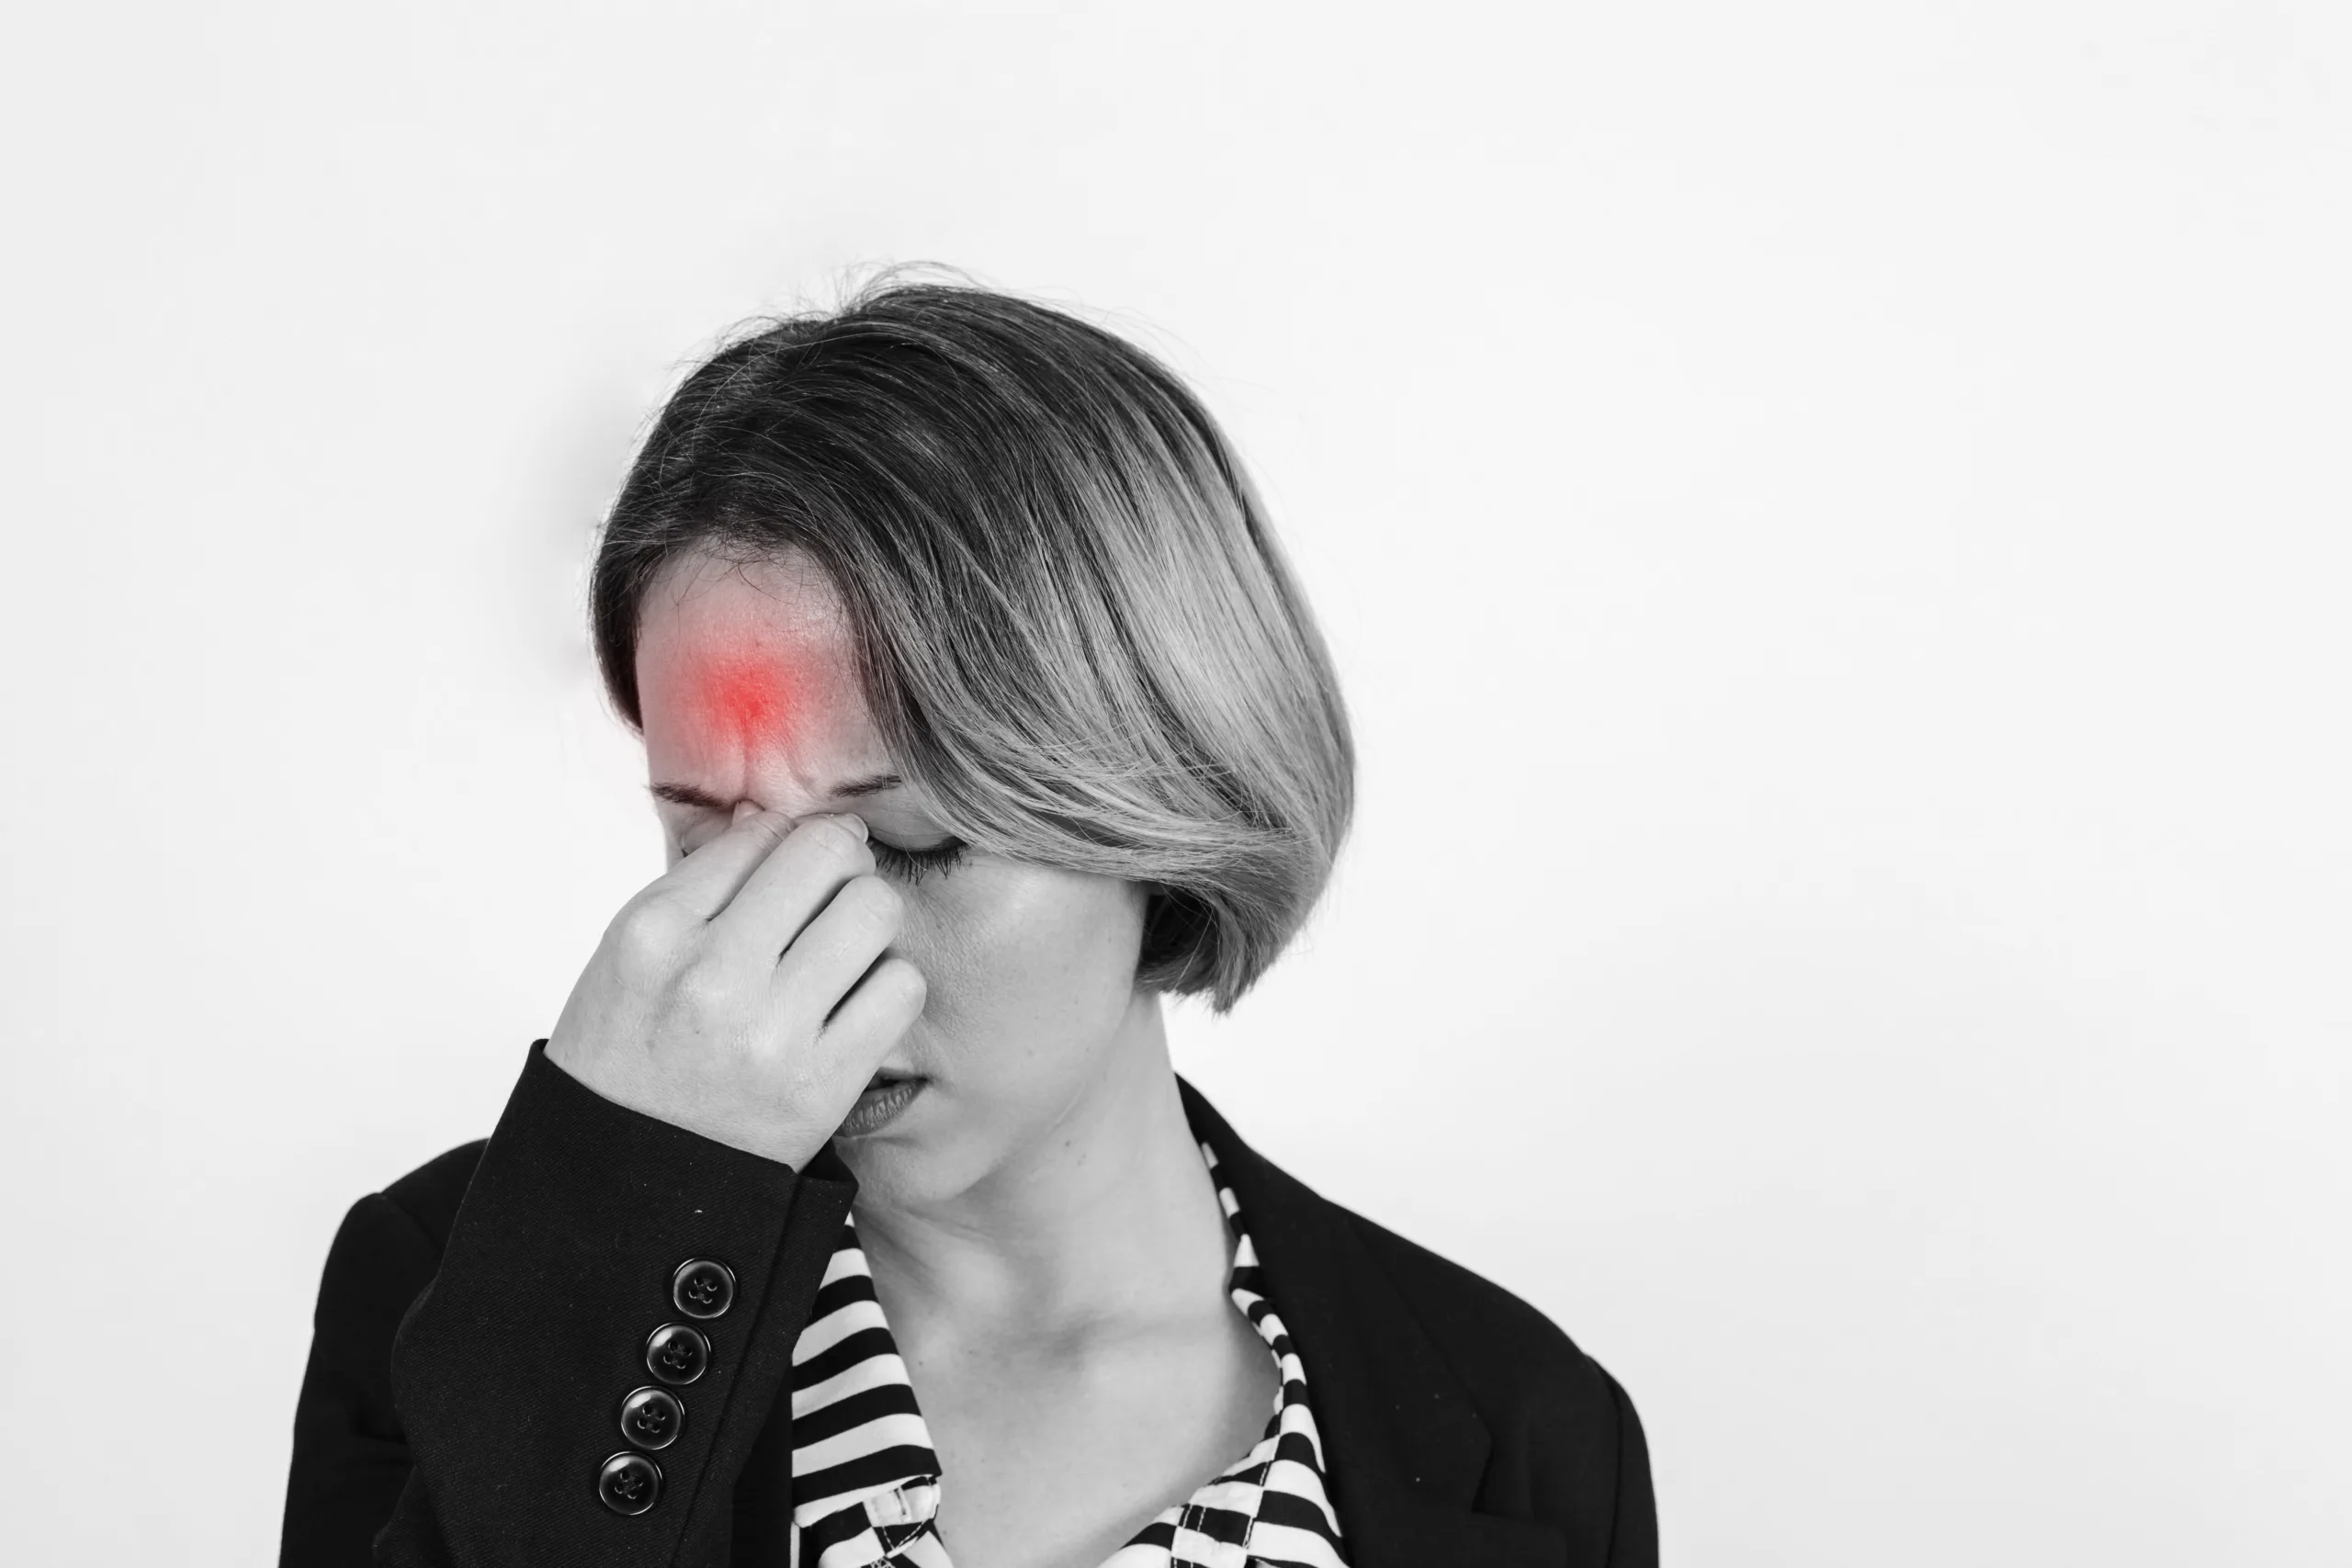 How to Tell If Sinus Infection has Spread to Brain